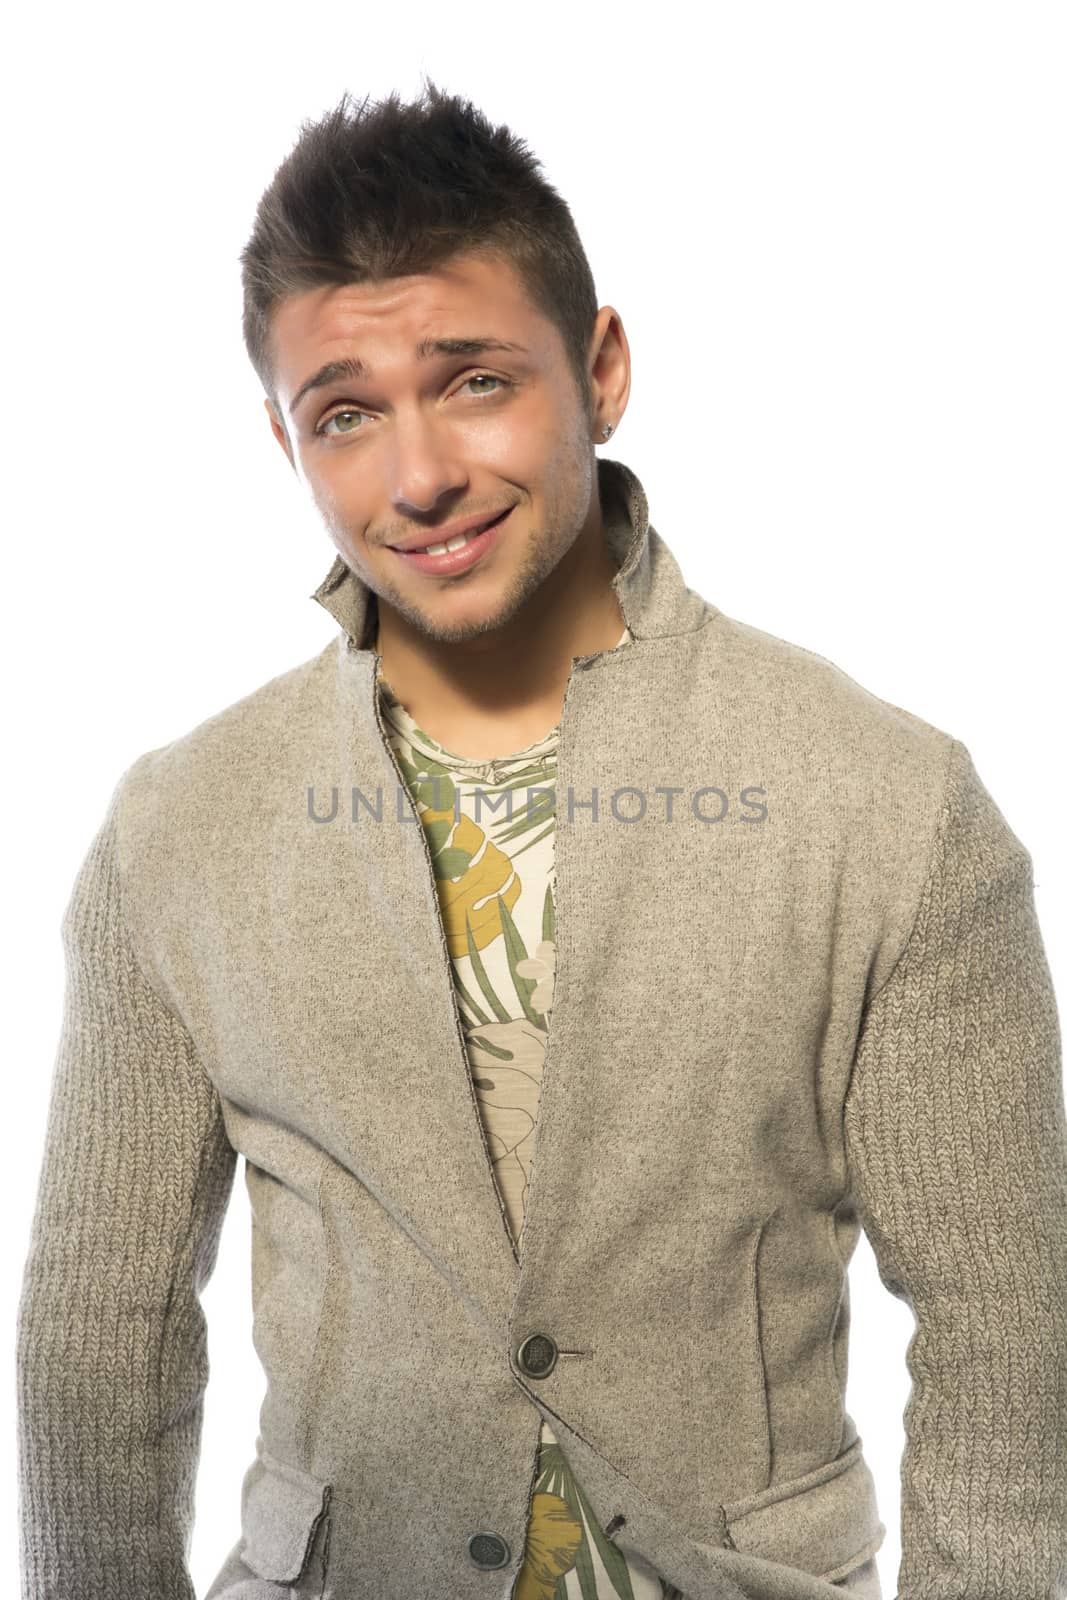 Smiling young man with wool sweater on white background by artofphoto